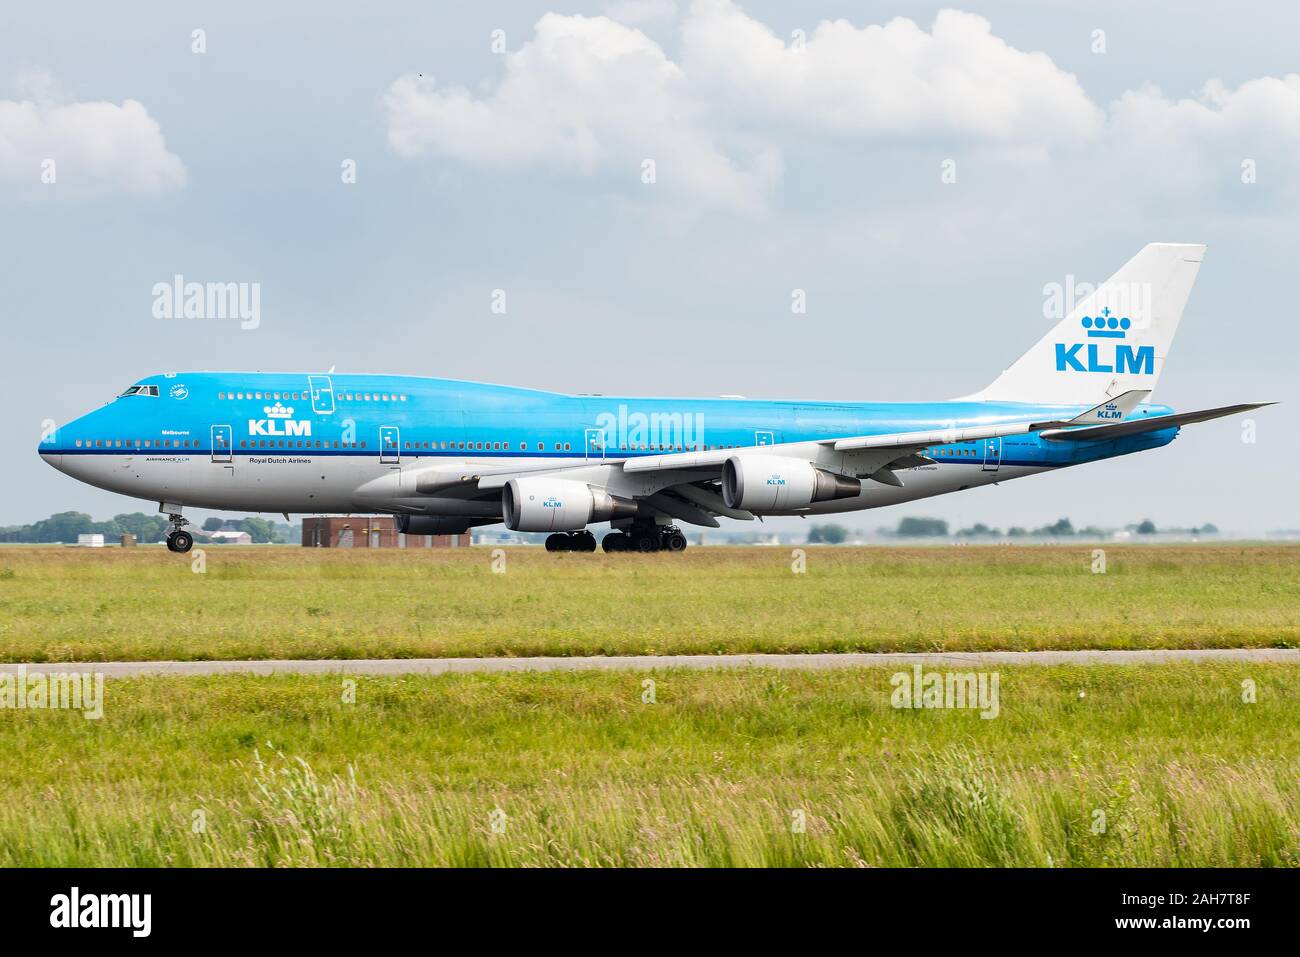 A Boeing 747 passenger aircraft of KLM Royal Dutch Airlines at the Amsterdam Airport Schiphol. Stock Photo